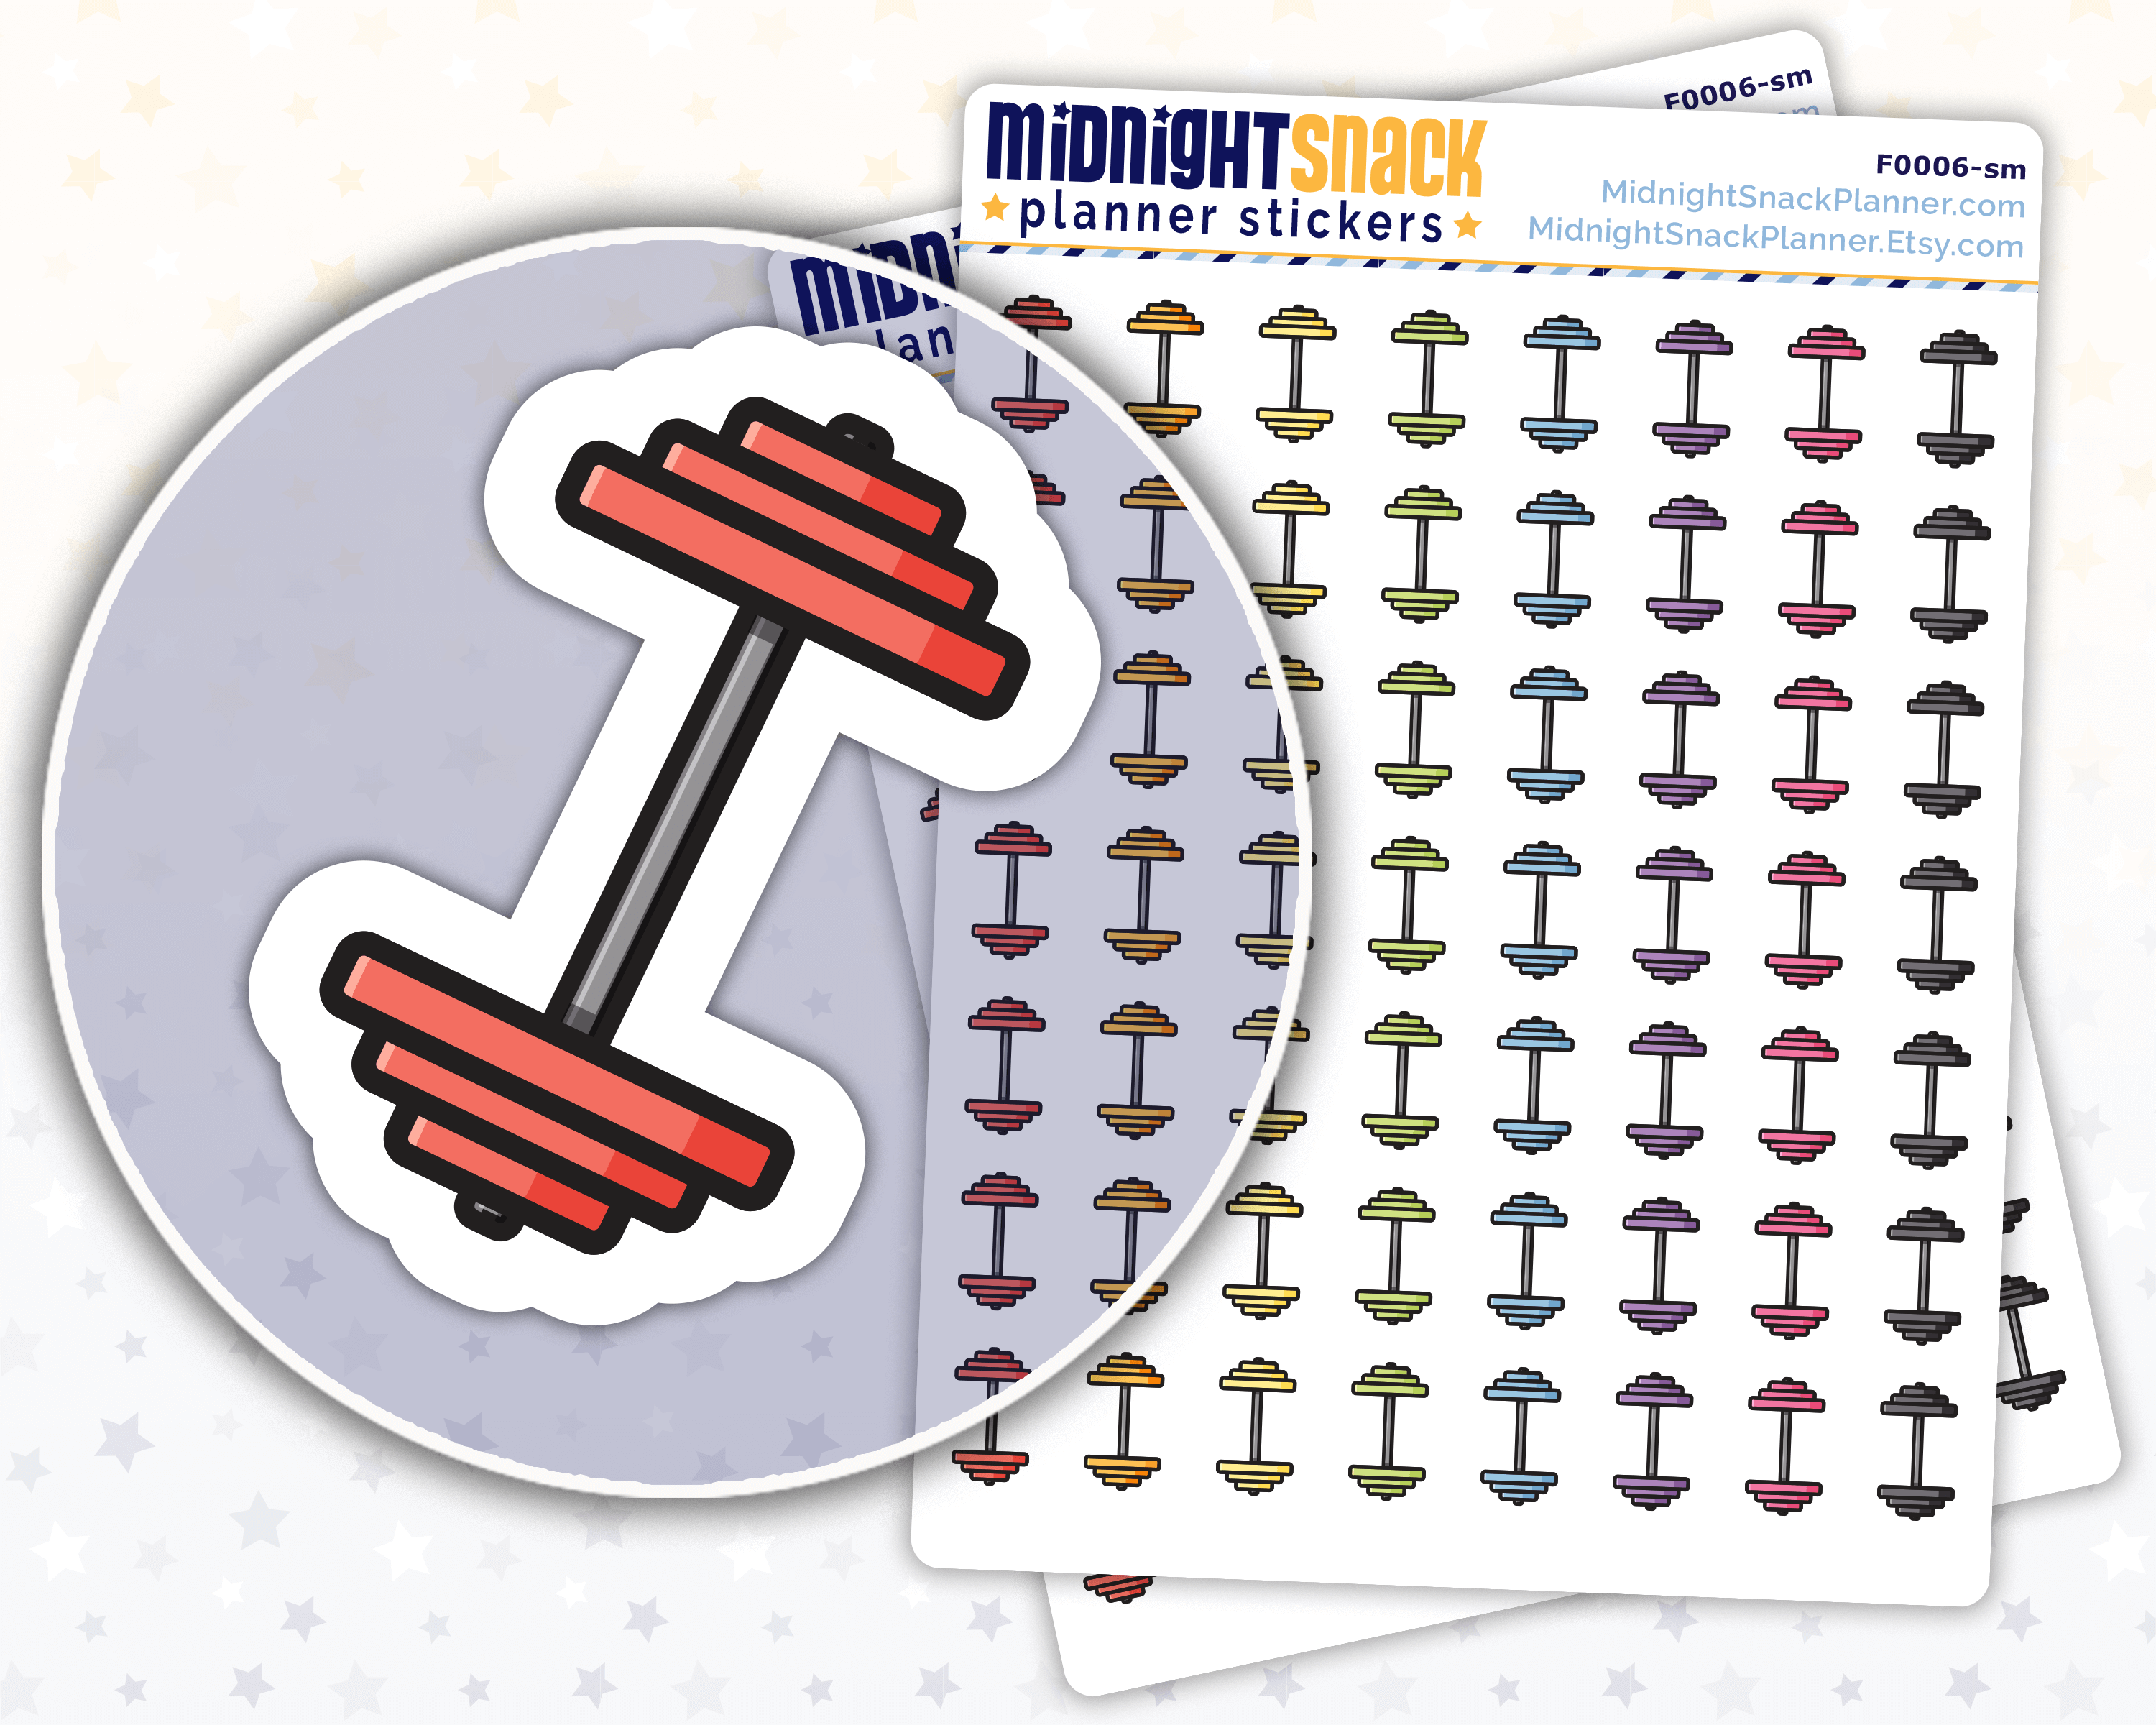 Dumbbell Weights Icon: Strength Training Fitness Planner Stickers Midnight Snack Planner